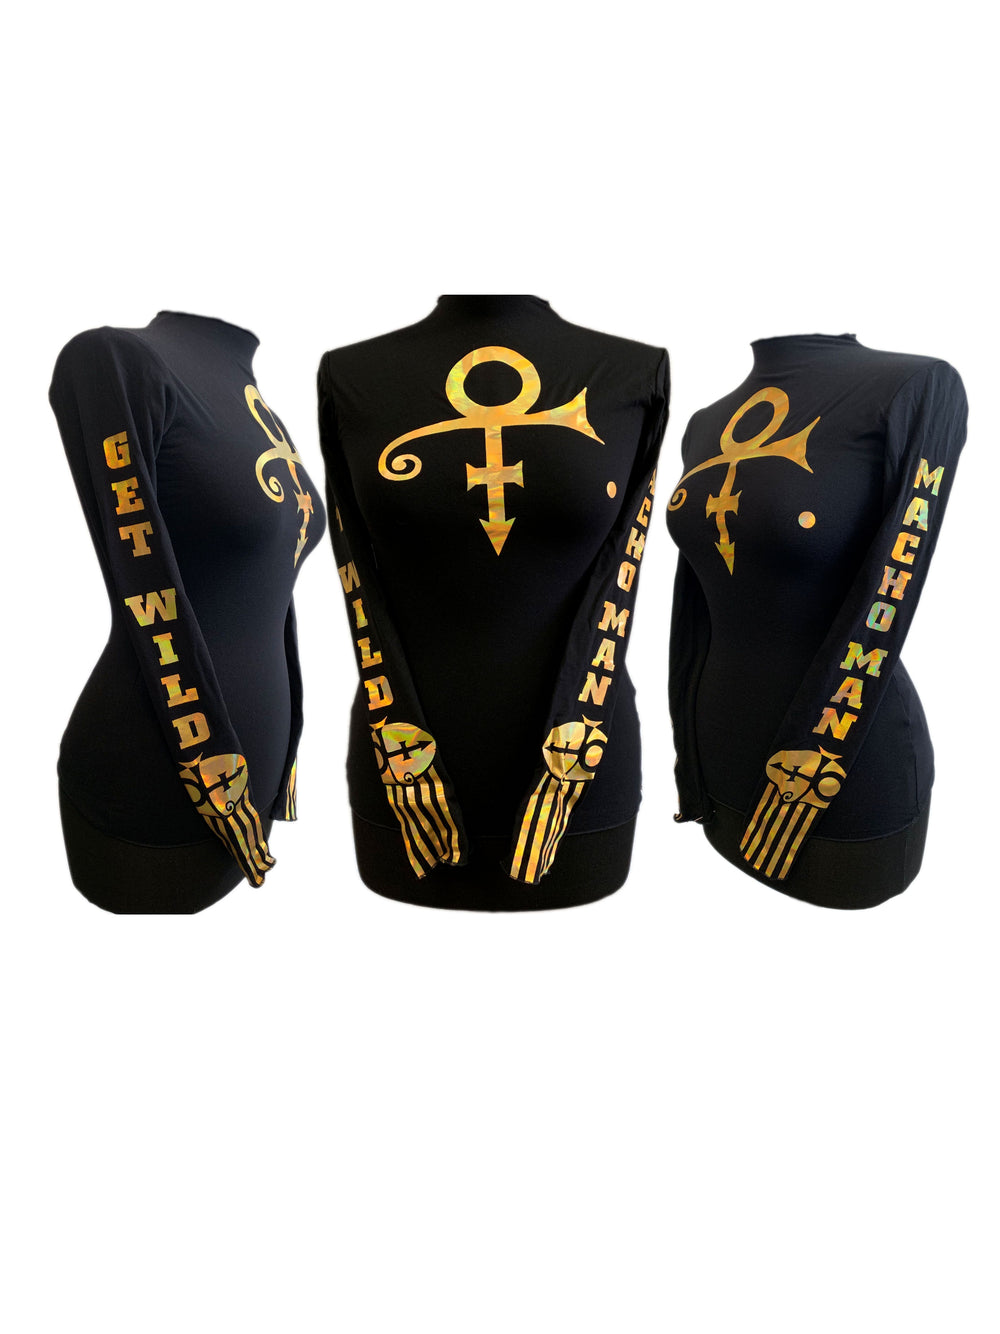 PRINCE - NPG - GET WILD  RARE OFFICIAL SHIRT AS WORN FOR THE AMA PERFORMANCE IN 1995